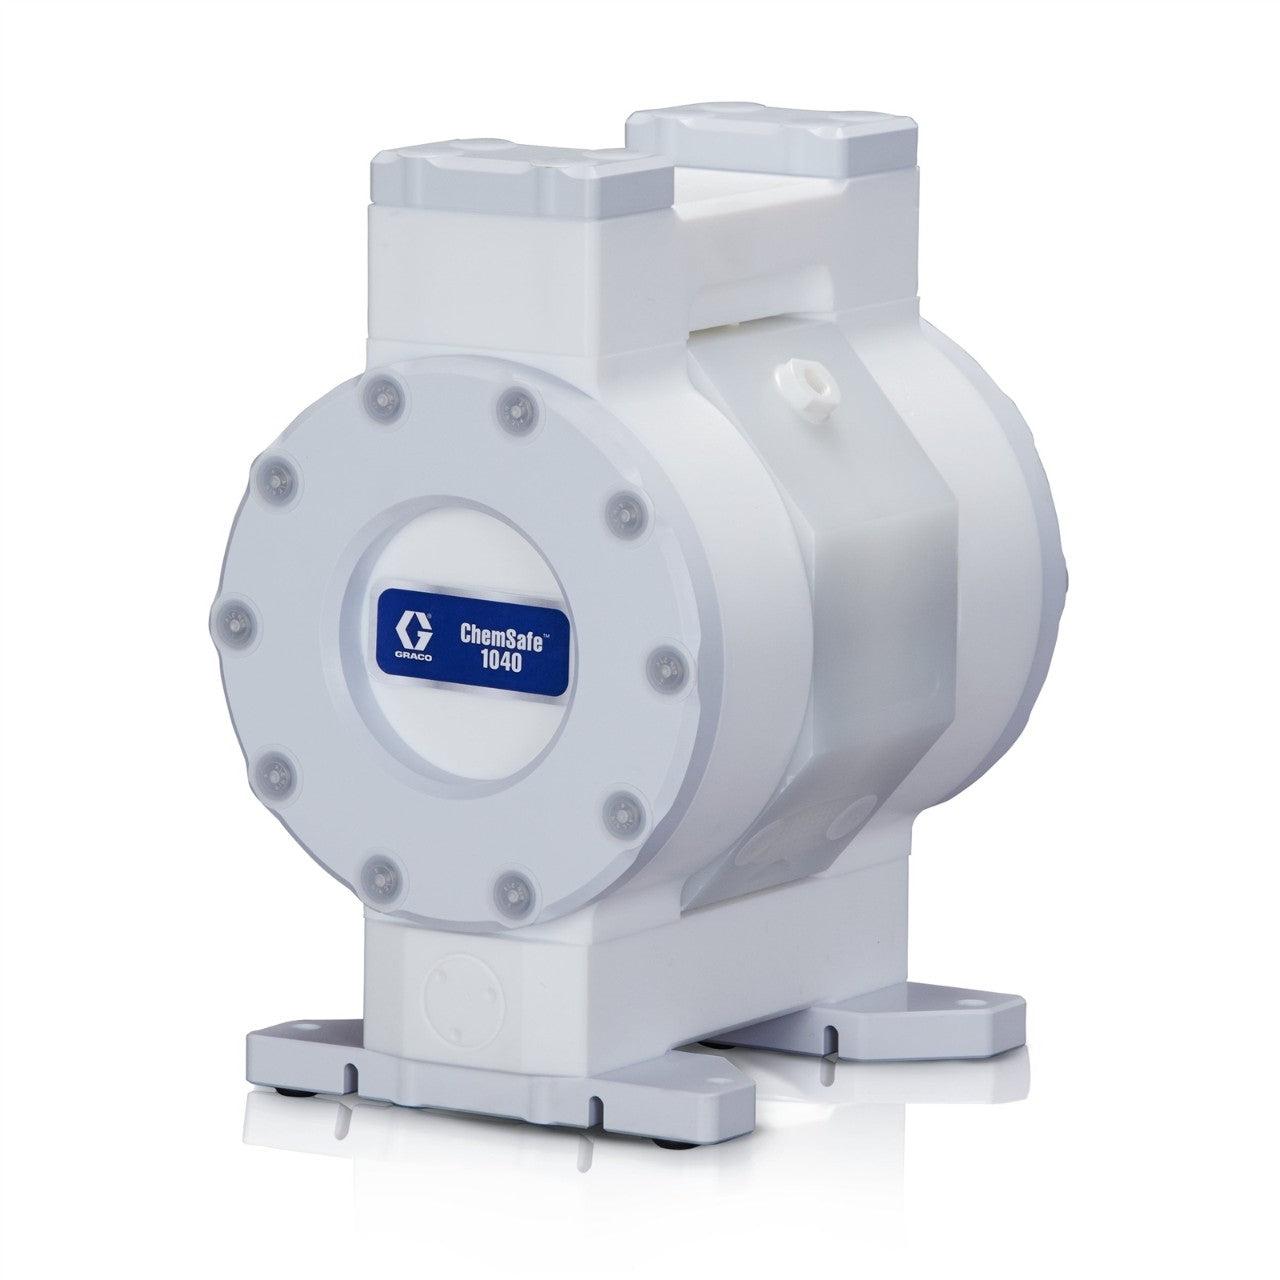 ChemSafe 1040 Air Operated Double Diaphragm Pump with PTFE Seat, PTFE Ball, Overmolded PTFE Diaphragm, PTFE Fluid Path & BSPT Port